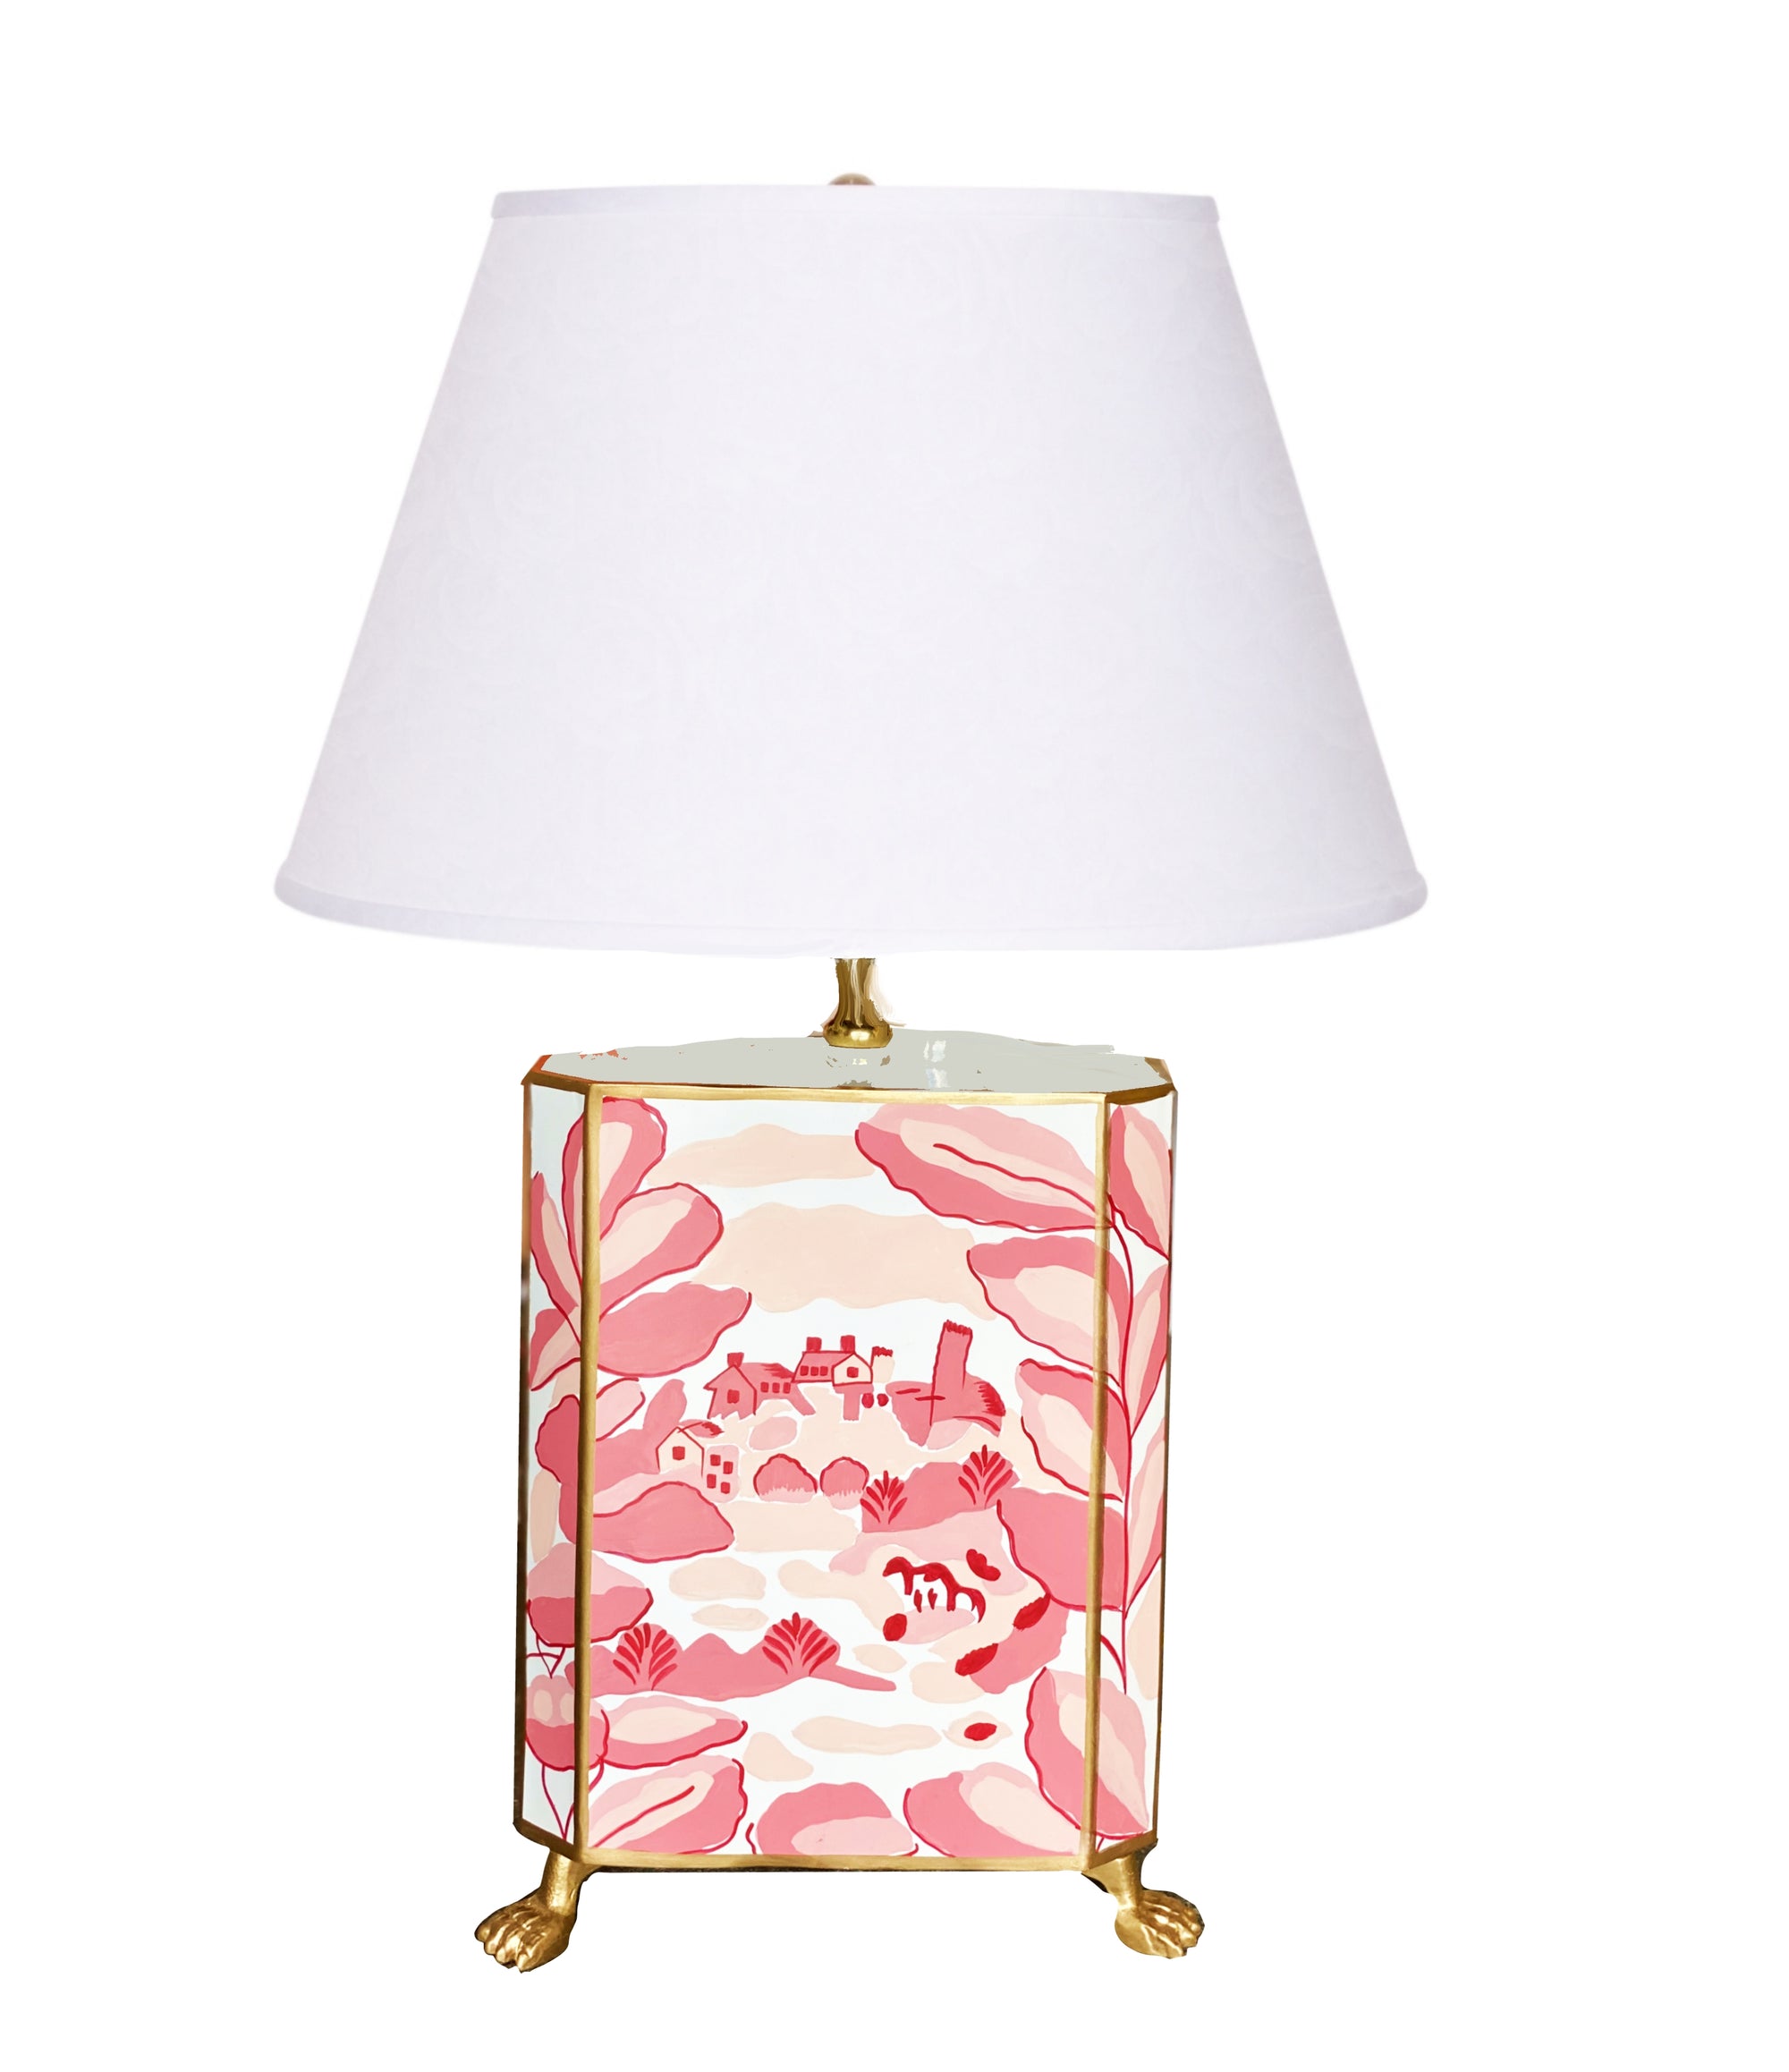 Bristow in Pink Footed Lamp by Dana Gibson